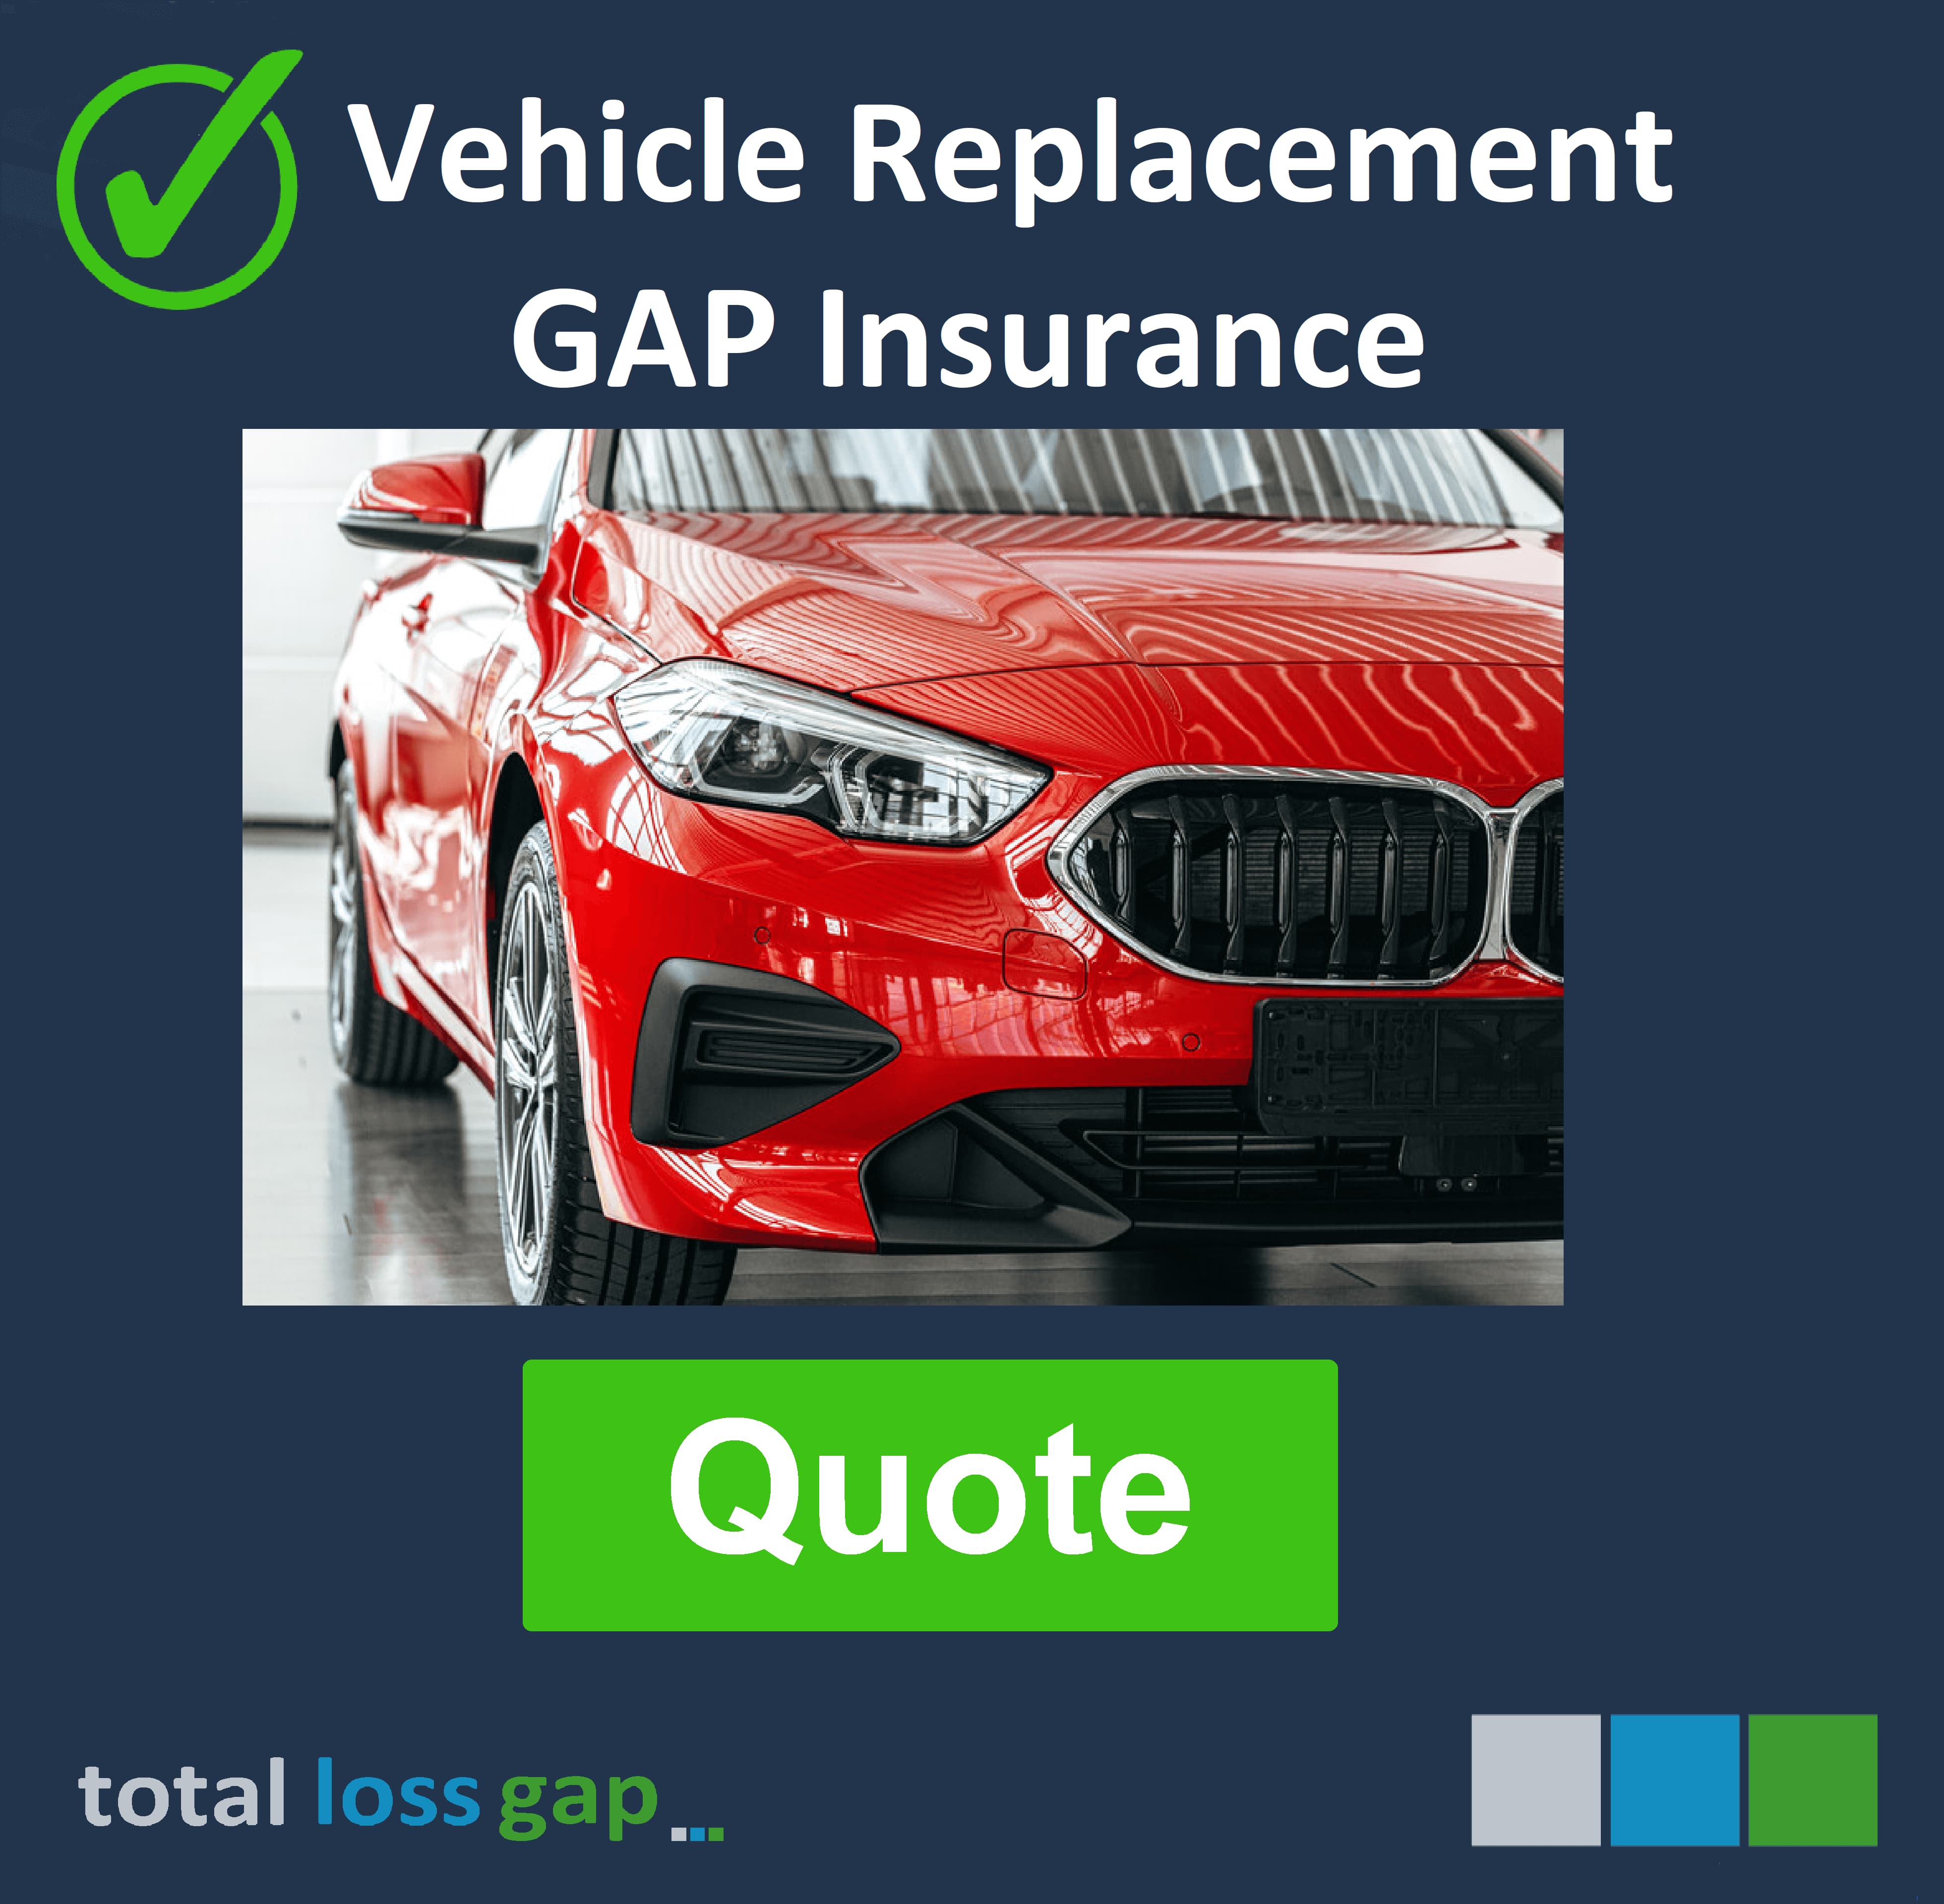 Vehicle Replacement Gap Insurance Quote